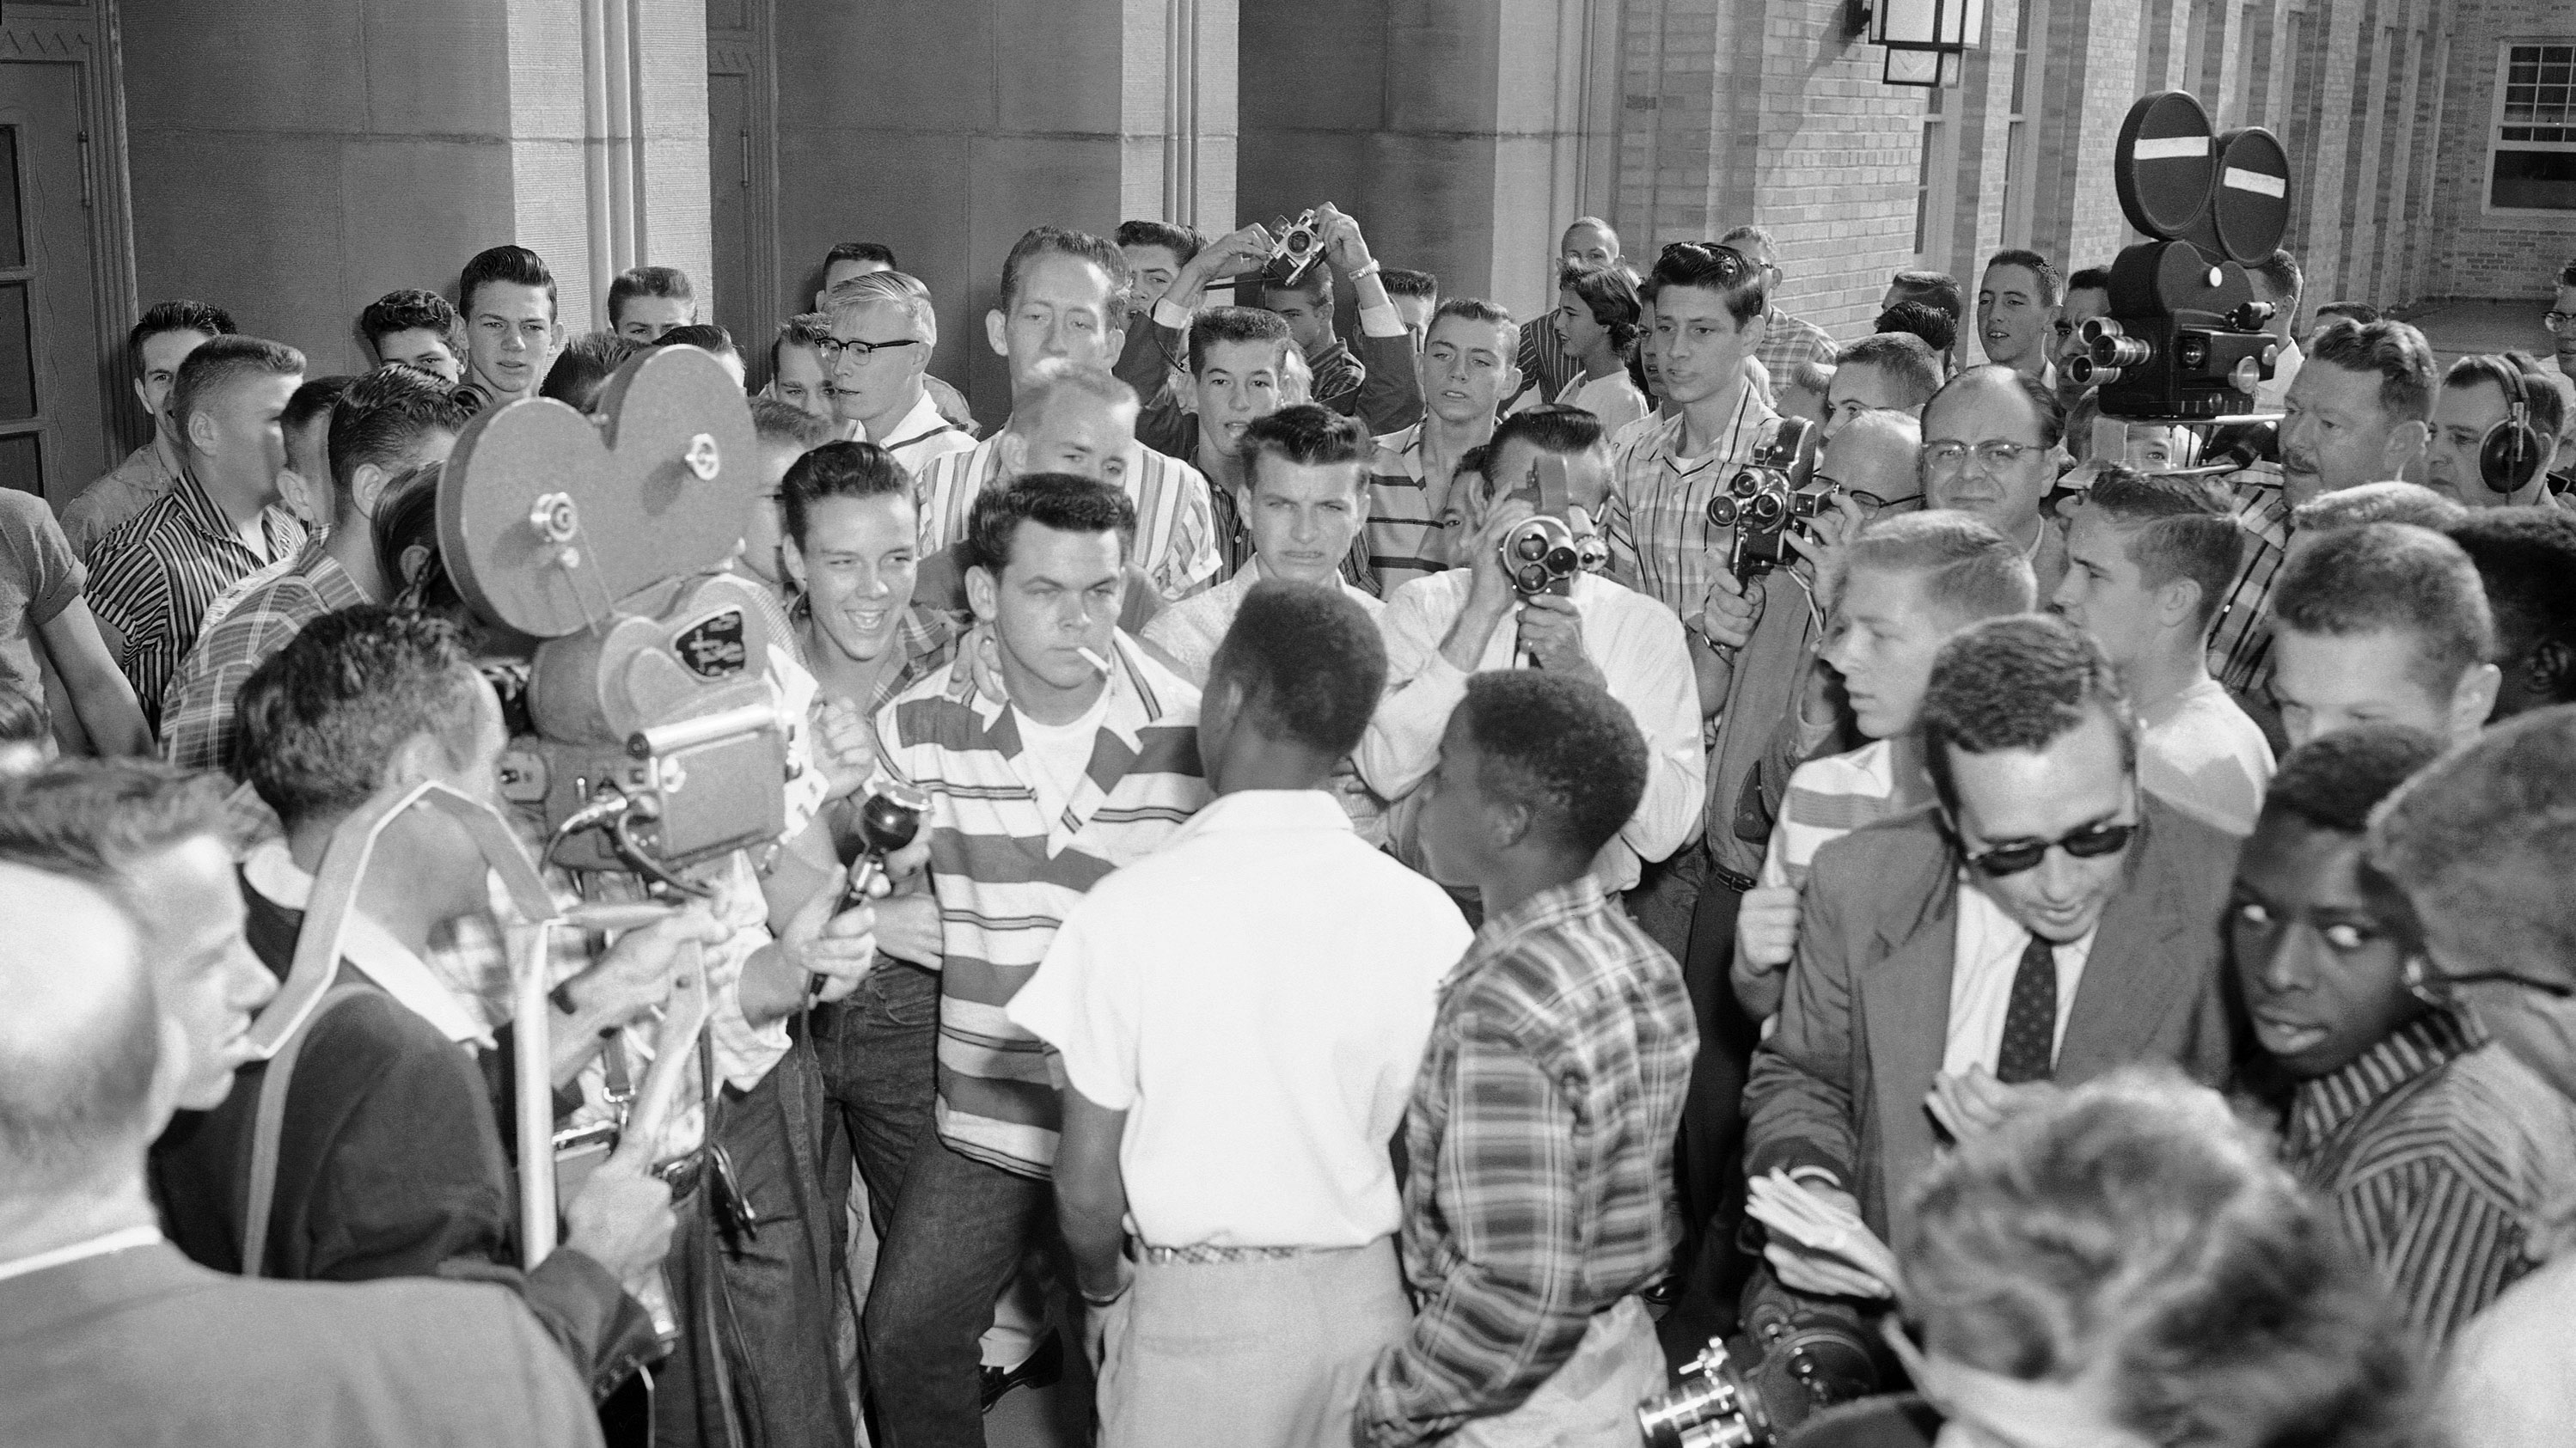 Defiant white students at Arkansas' North Little Rock High School block the doors of the school, denying access to six African-American students enrolled in the school Sept. 9, 1957. Moments later the African American students were shoved down a flight of stairs and onto the sidewalk, where city police broke up the altercation. 